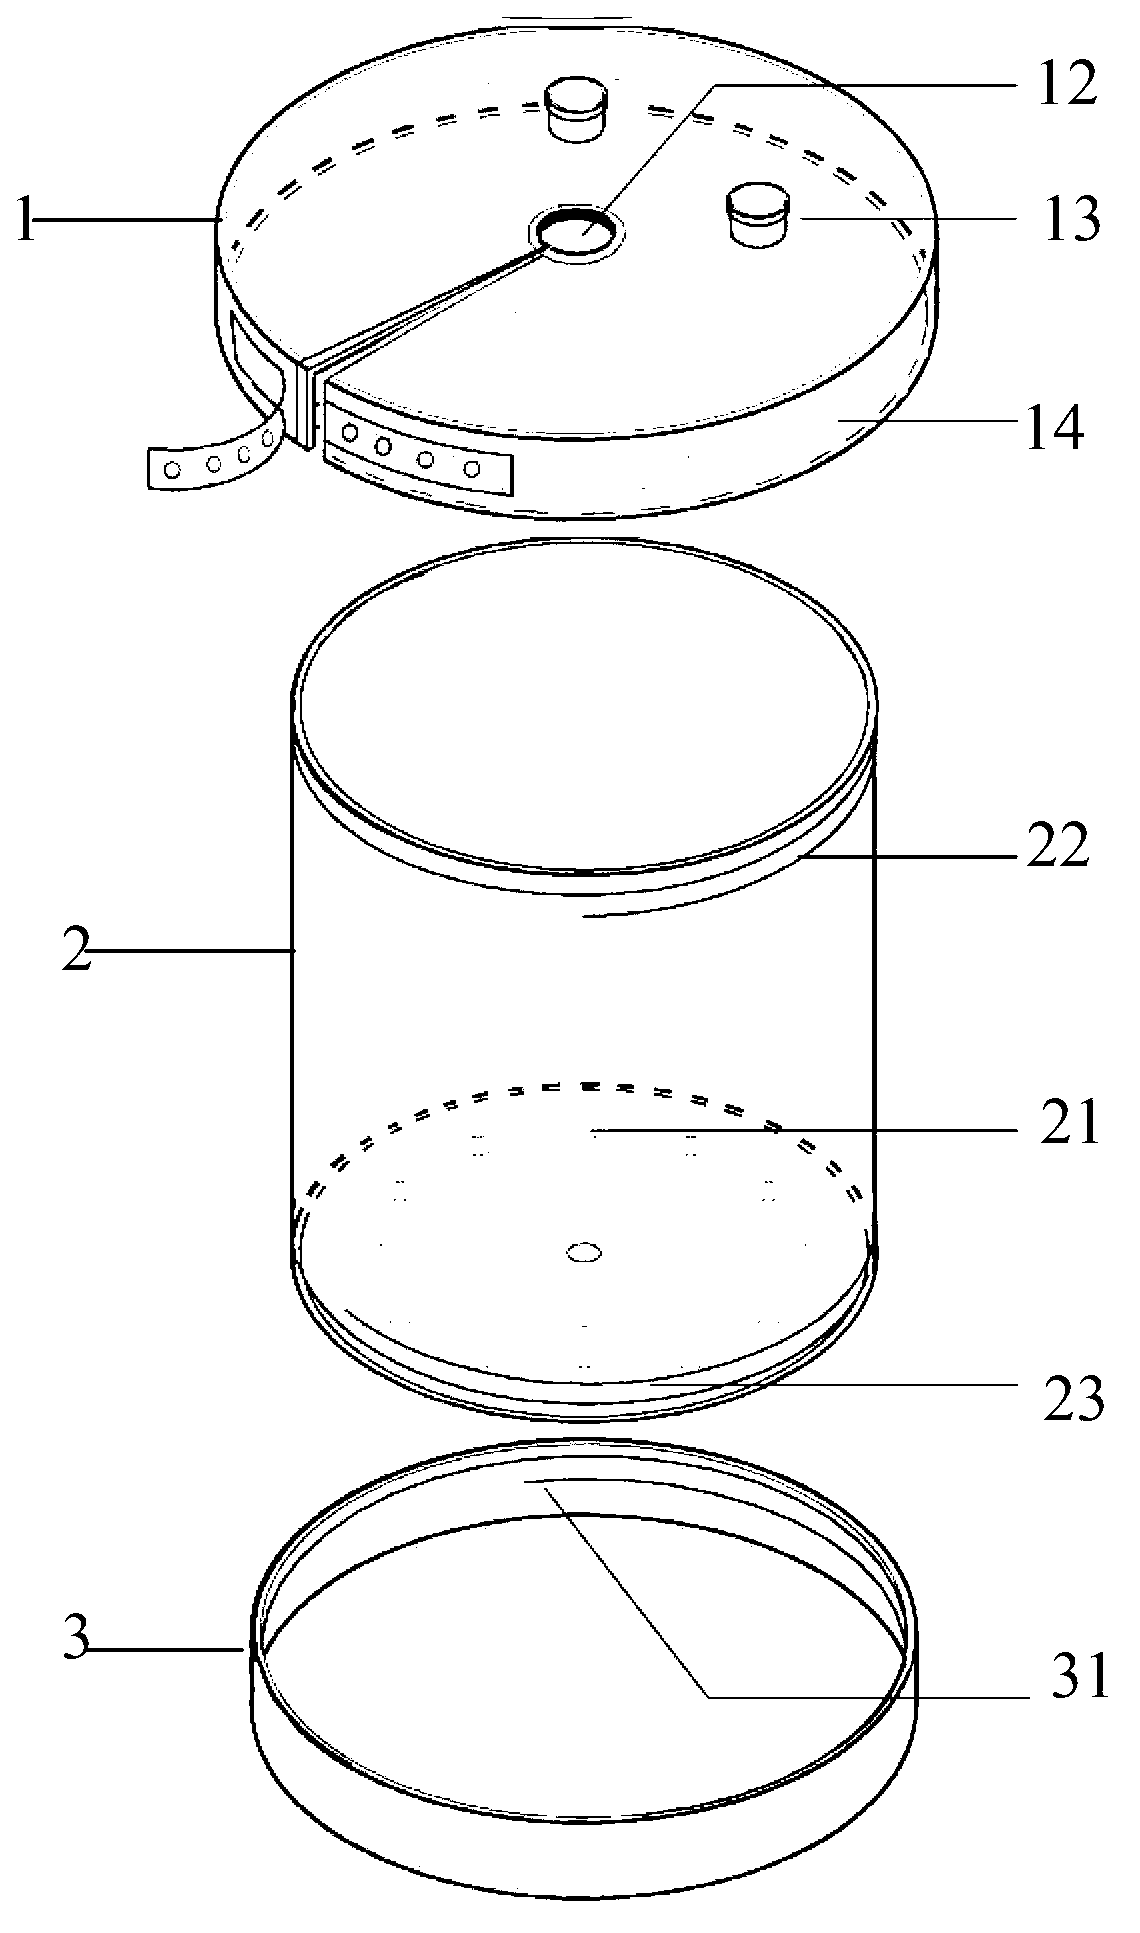 Plant water consumption measurement and water controlling device